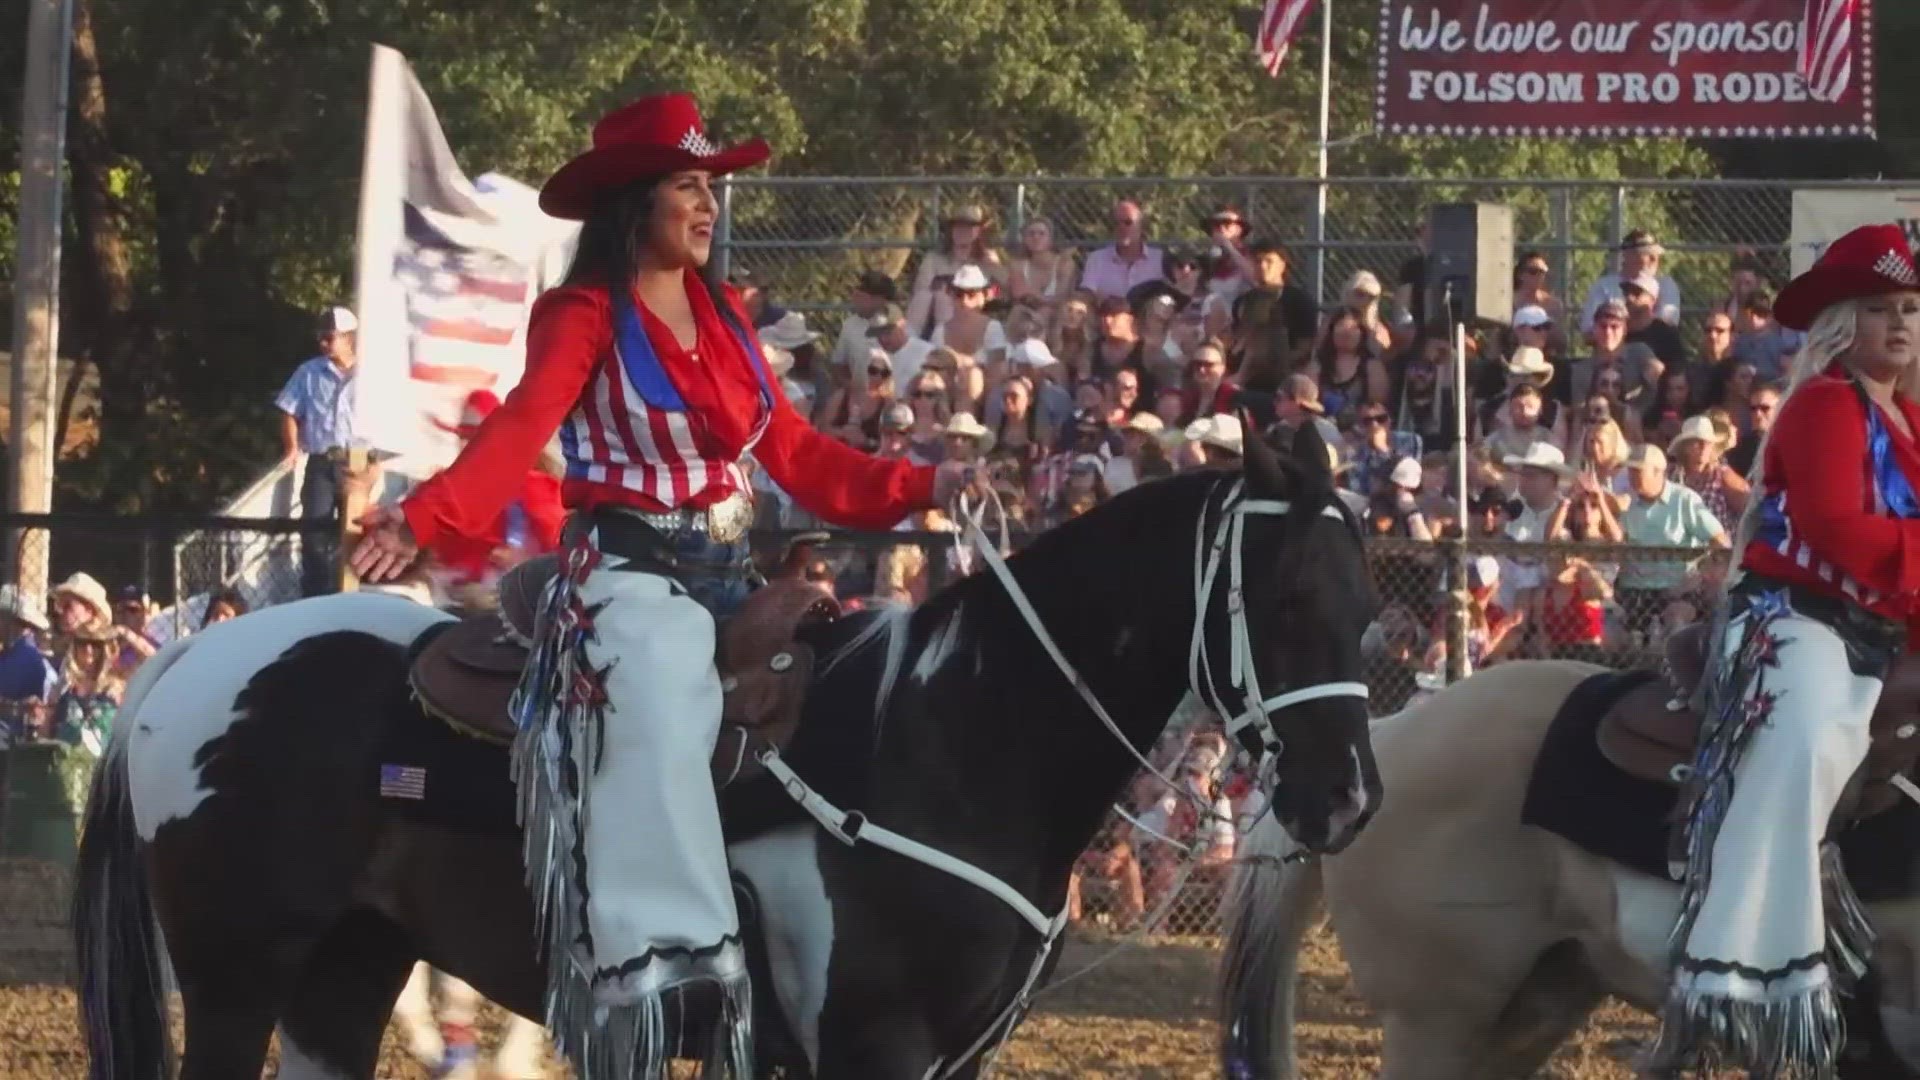 Folsom for the second straight day turned into the wild west this Independence Day weekend as thousands of people celebrated the Folsom Pro Rodeo.